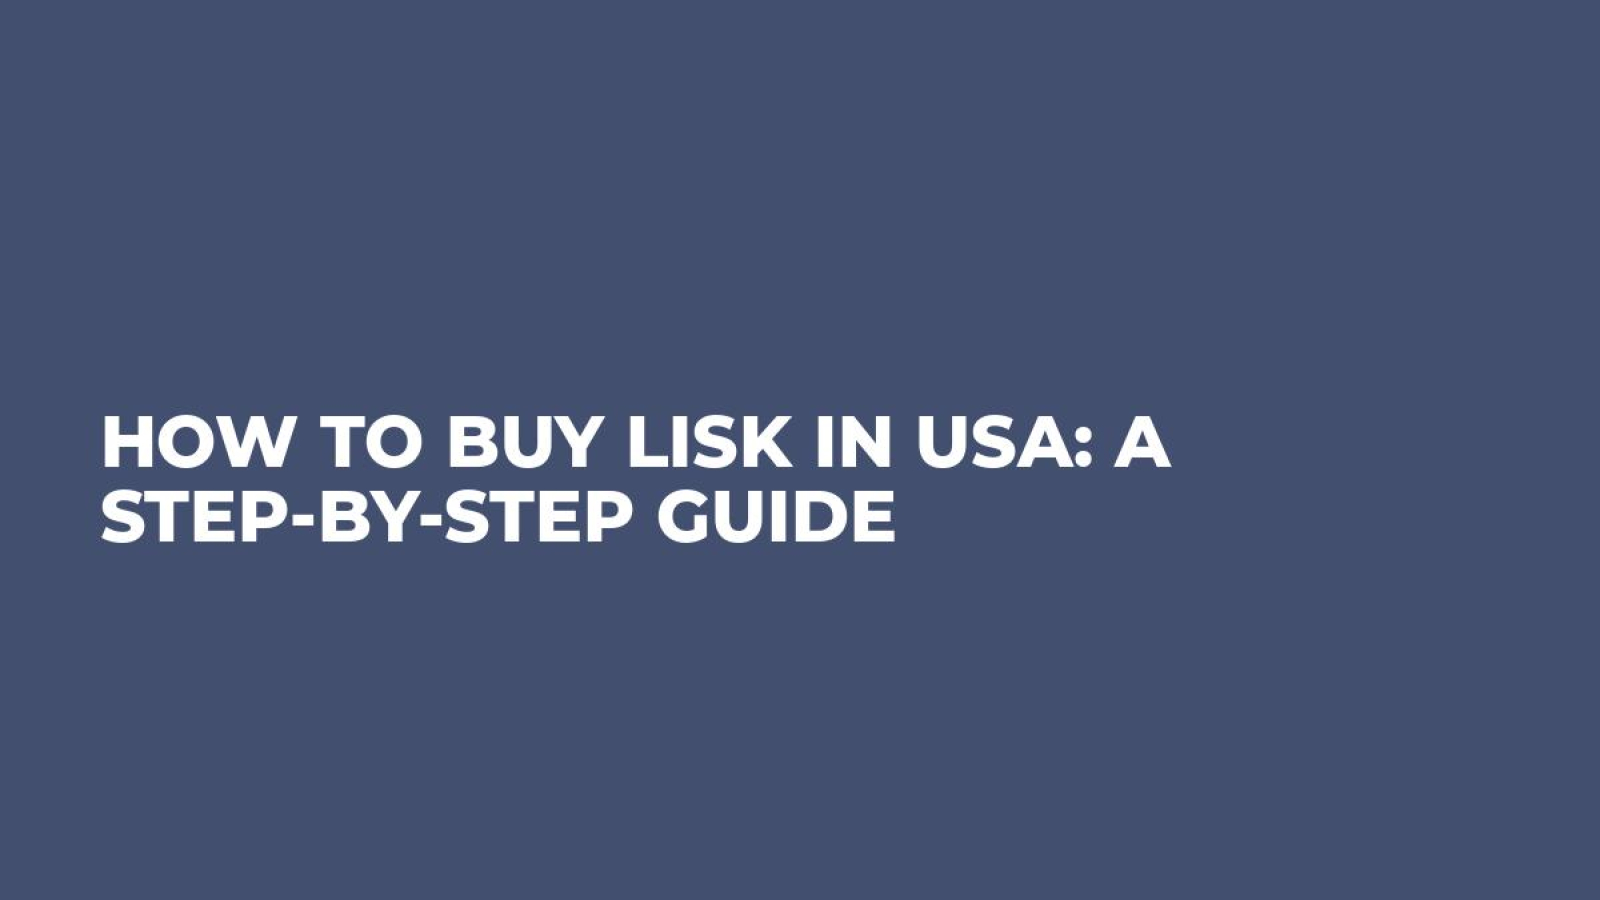 How to Buy Lisk in USA: A Step-by-Step Guide